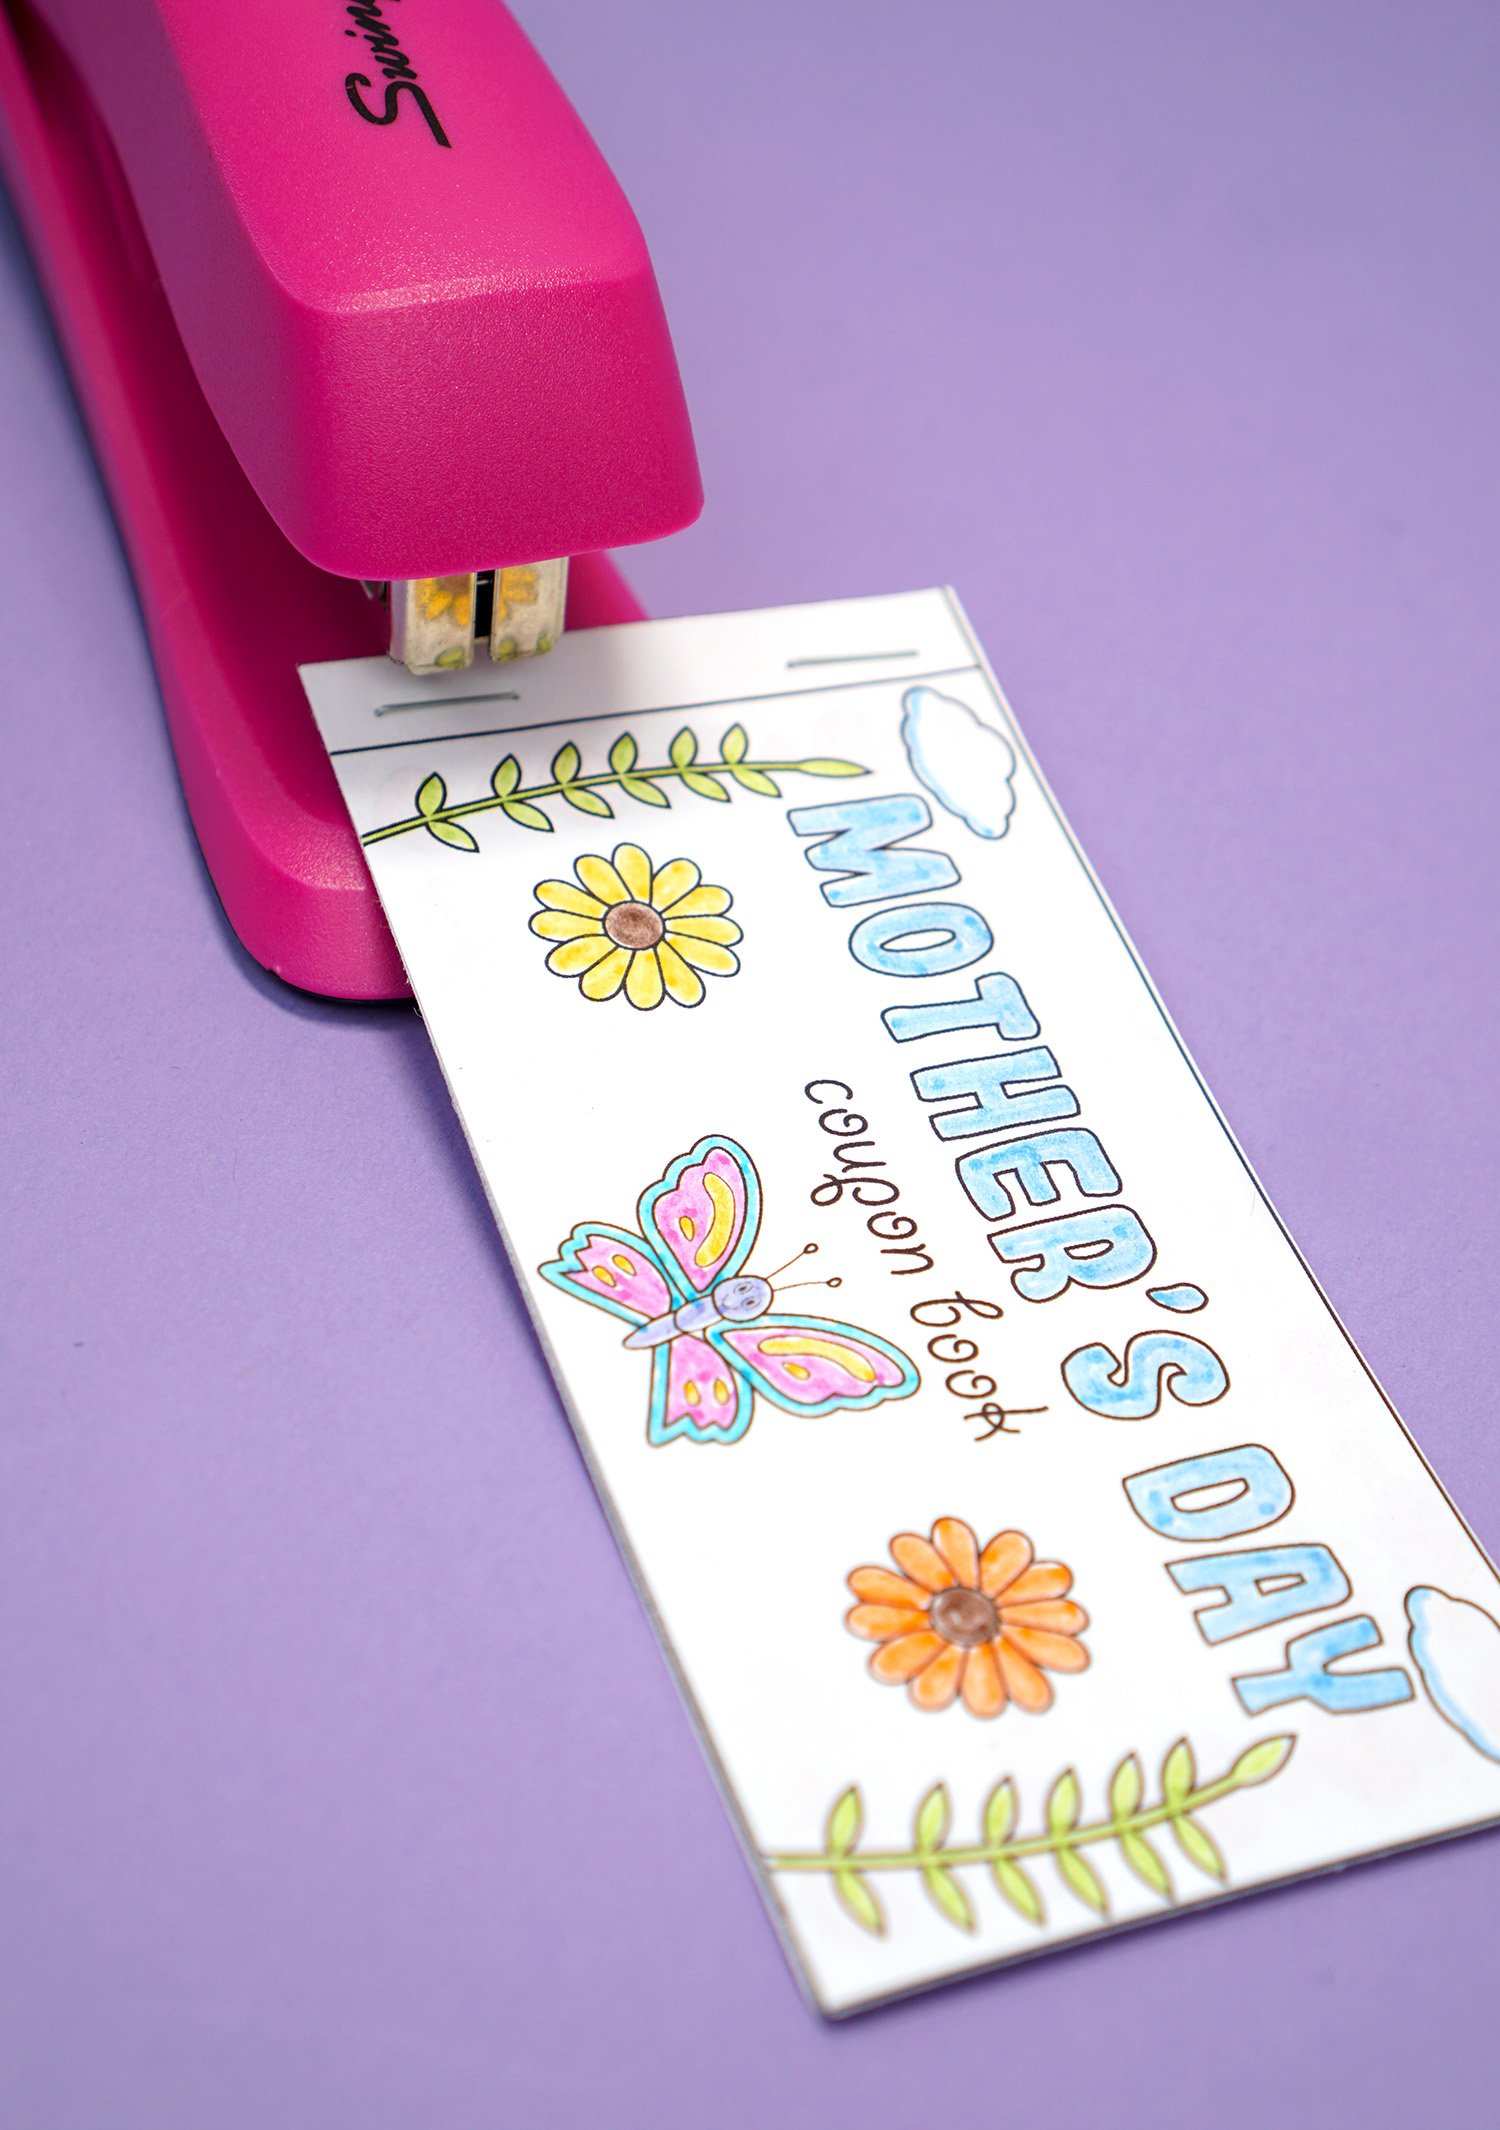 stapling coupon book for mothers day gift